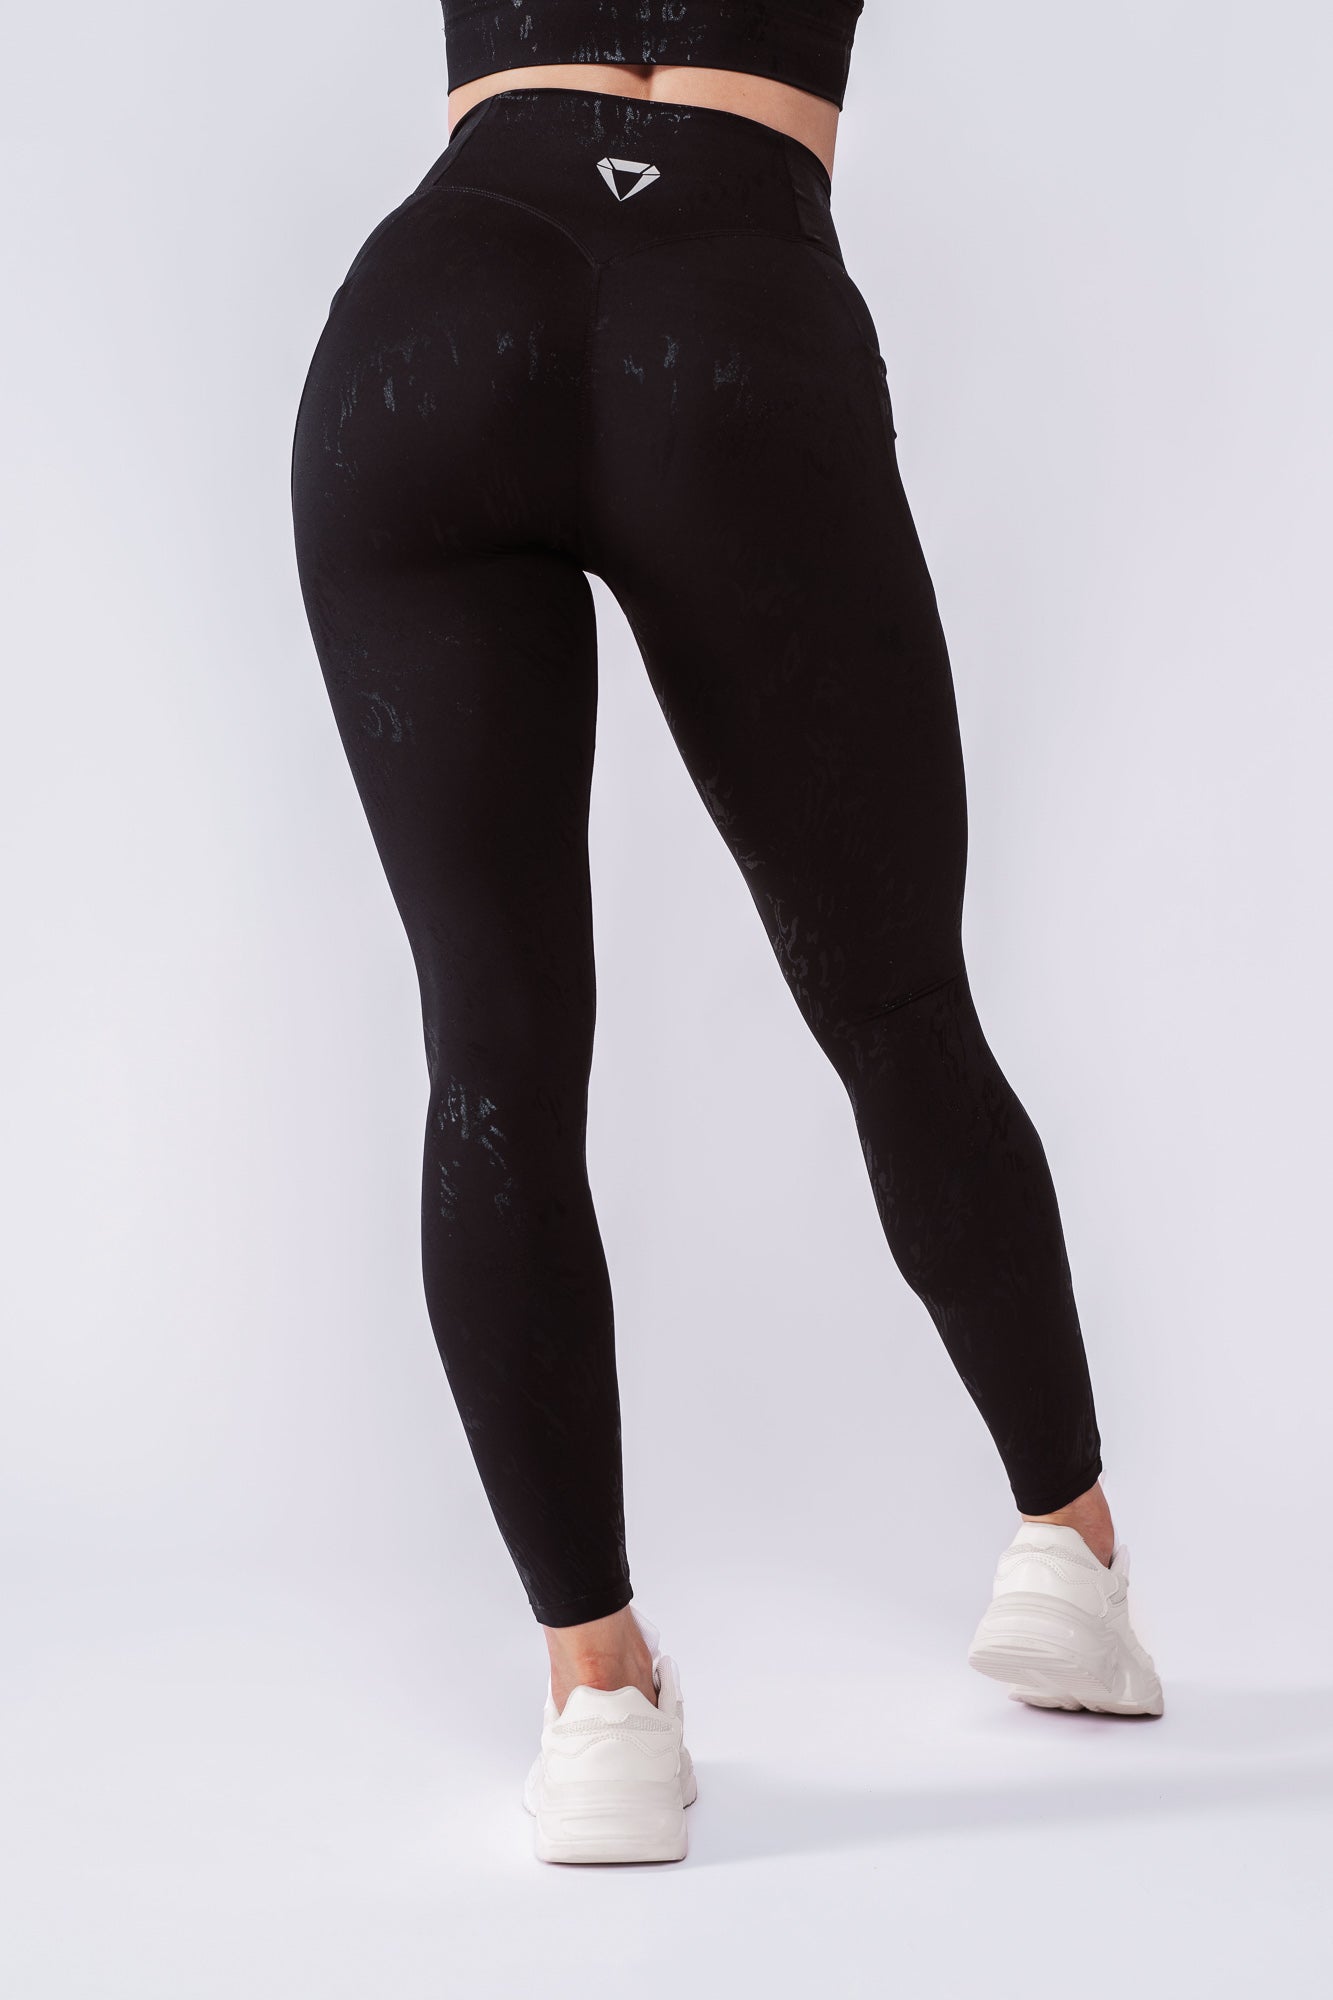 SECOND SKIN LEGGINGS - LIMITLESS EDITION